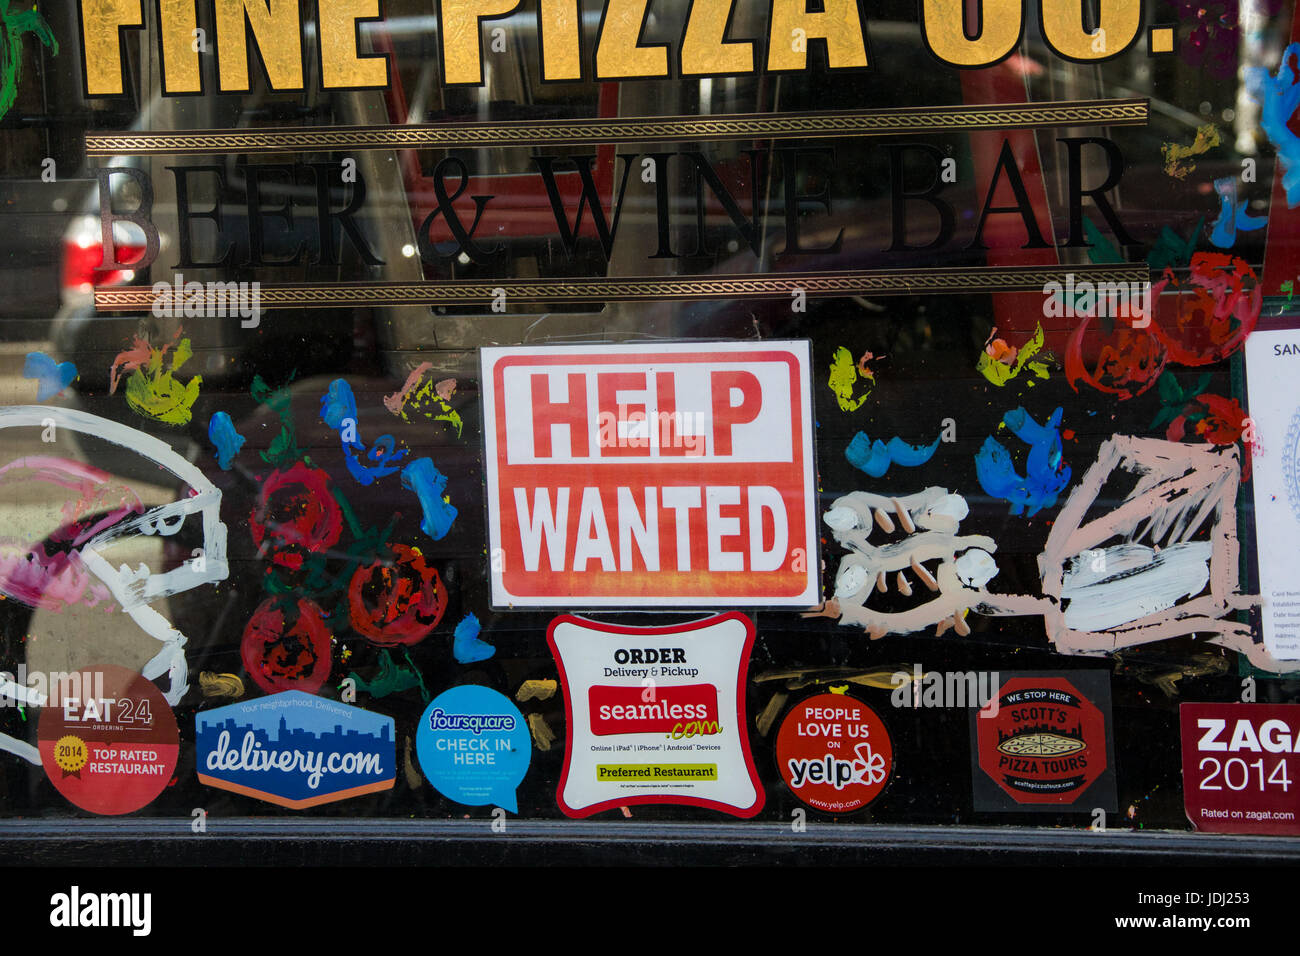 Help Wanted sign dans le Lower East Side, Manhattan, New York City, USA Banque D'Images